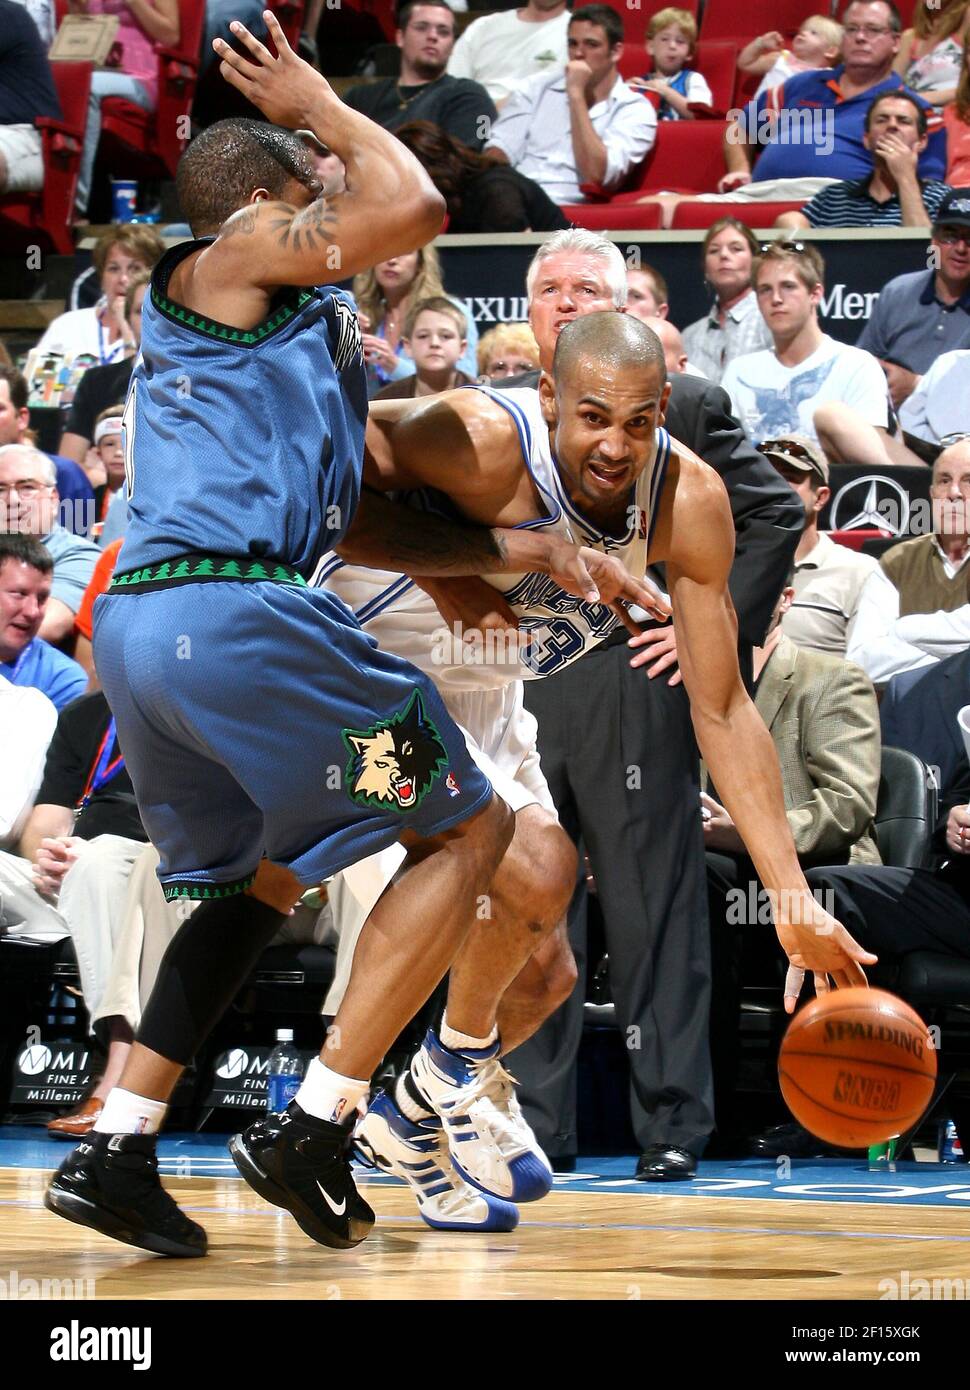 The Orlando Magic's Grant Hill drives around Minnesota Timberwolves  defender Rashad McCants during game action at the Amway Arena in Orlando,  Florida, Sunday, April 1, 2007. The Timberwolves defeated the Magic 105-104